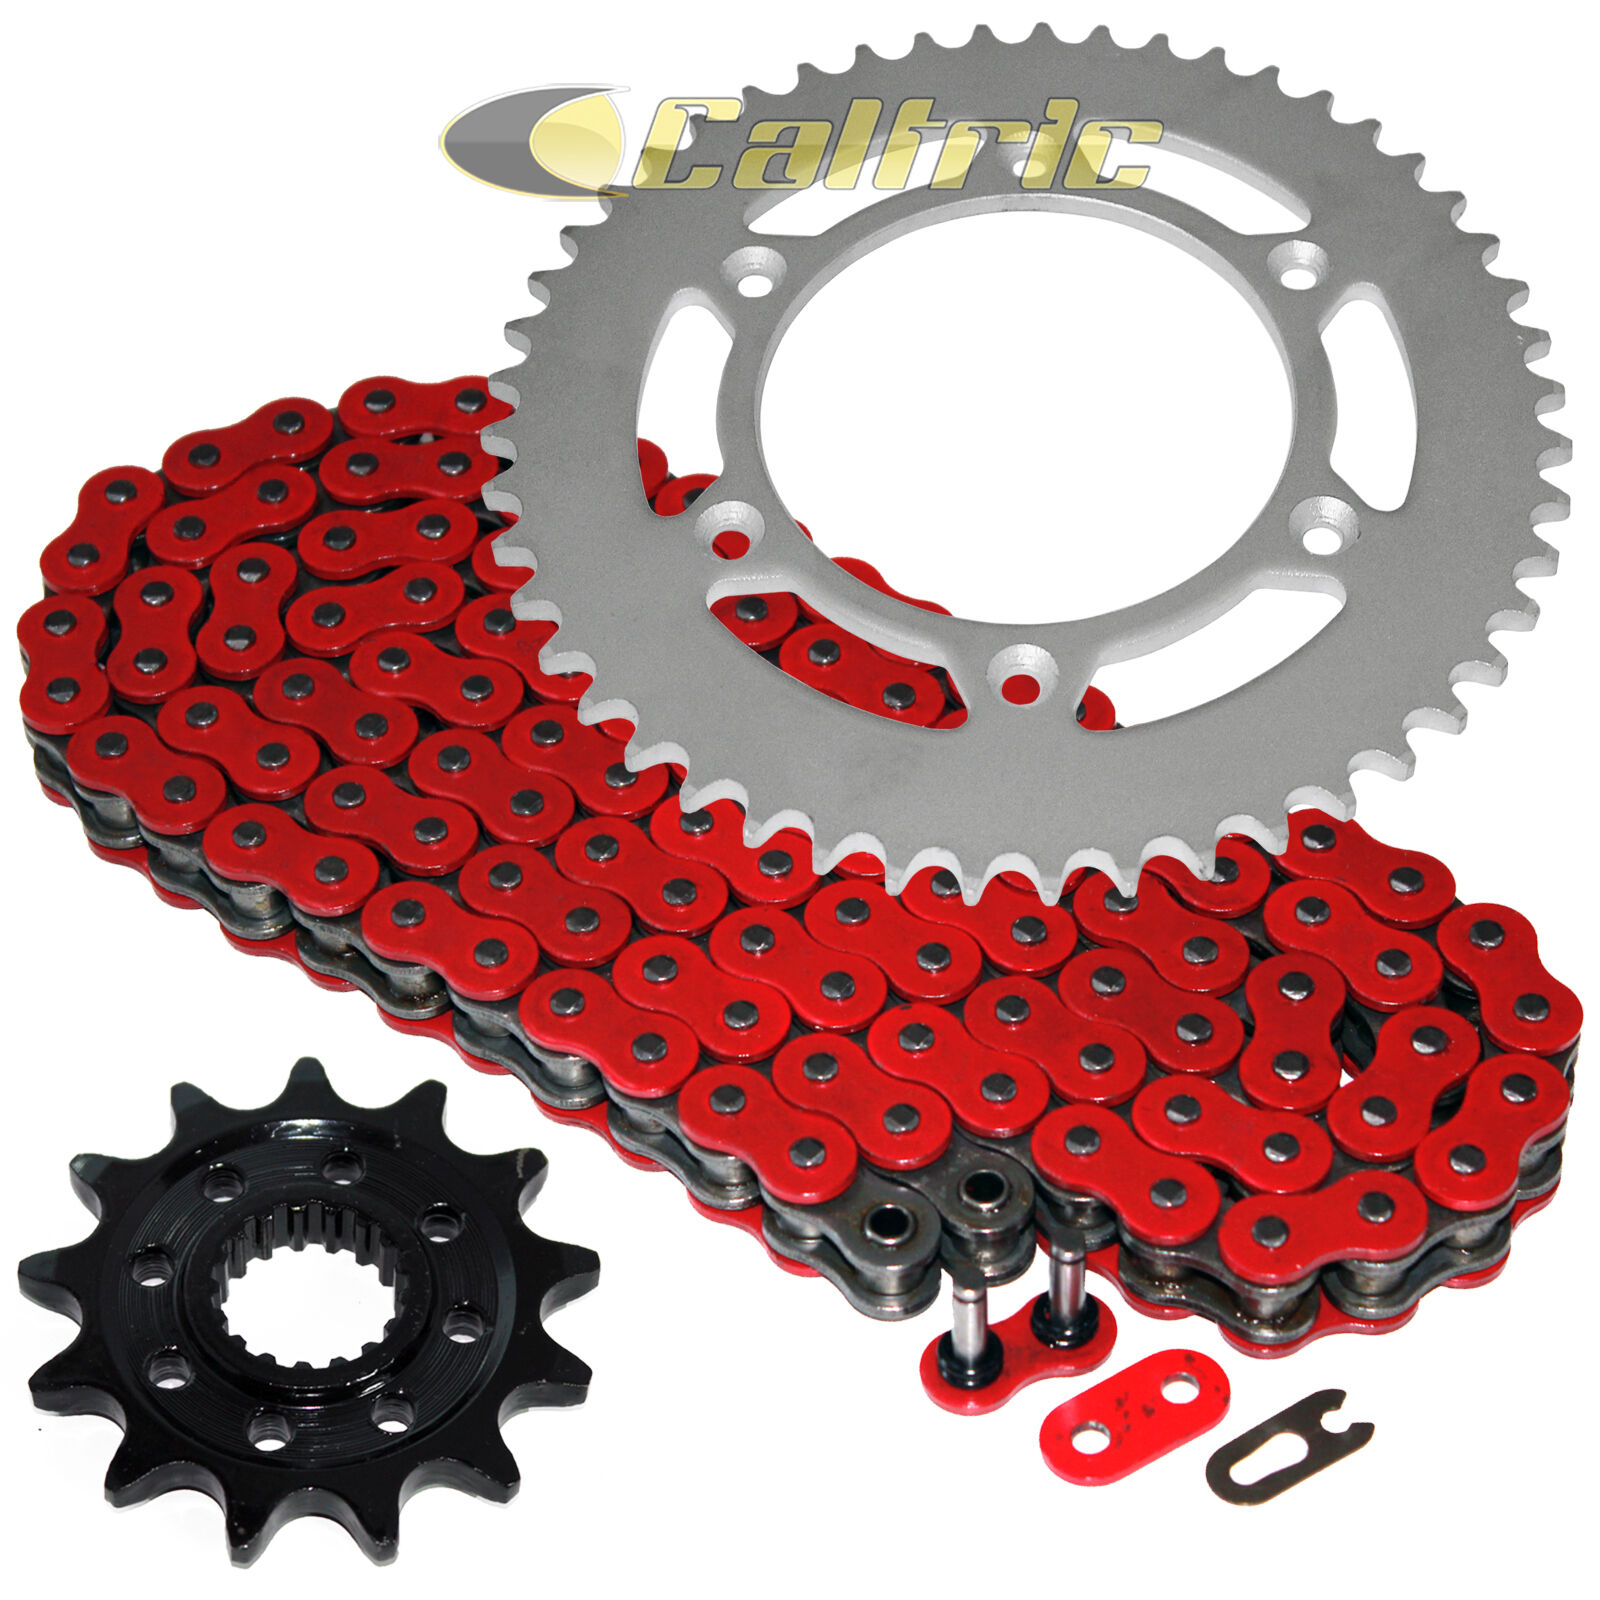 Red O-ring Drive Chain & Sprocket Kit For Honda Cr250r 2003 / Crf450r 2004-2016